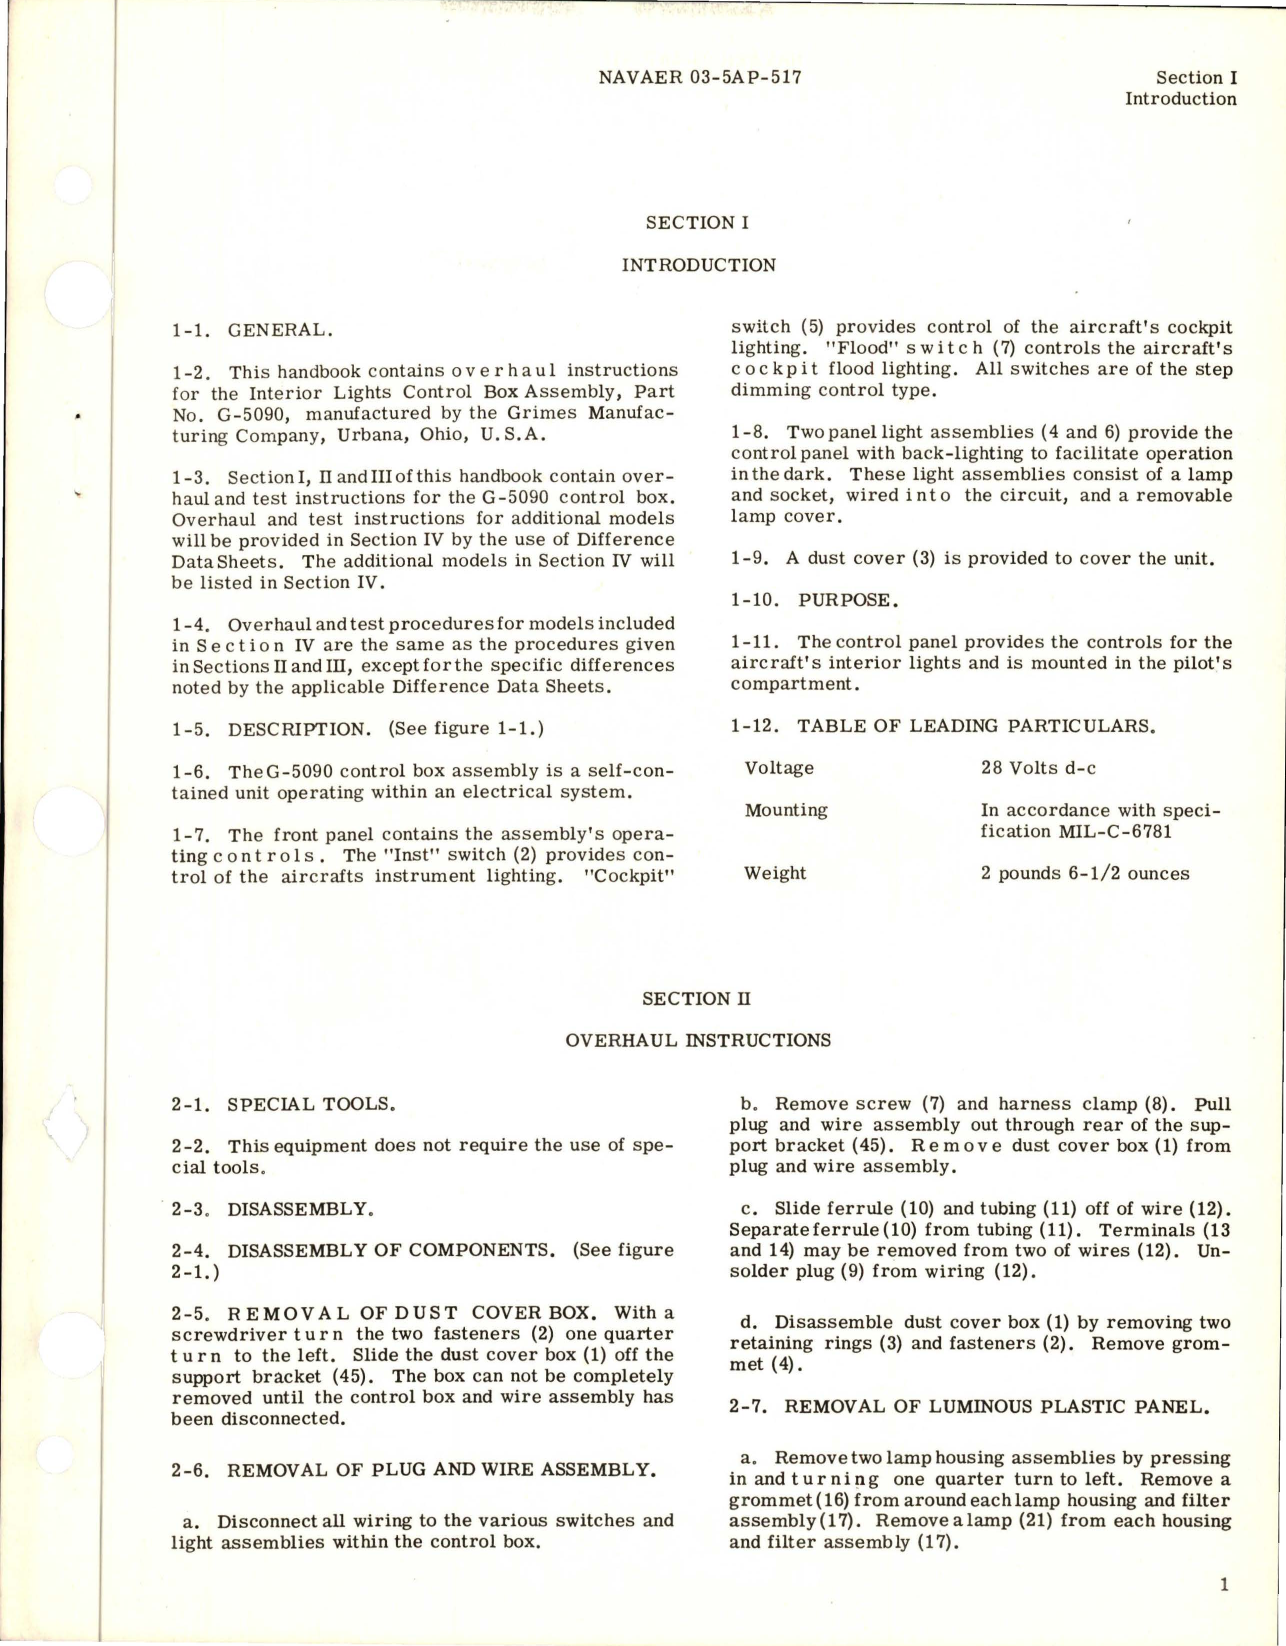 Sample page 5 from AirCorps Library document: Overhaul Instructions for Interior Lights Control Box - Part G-5090